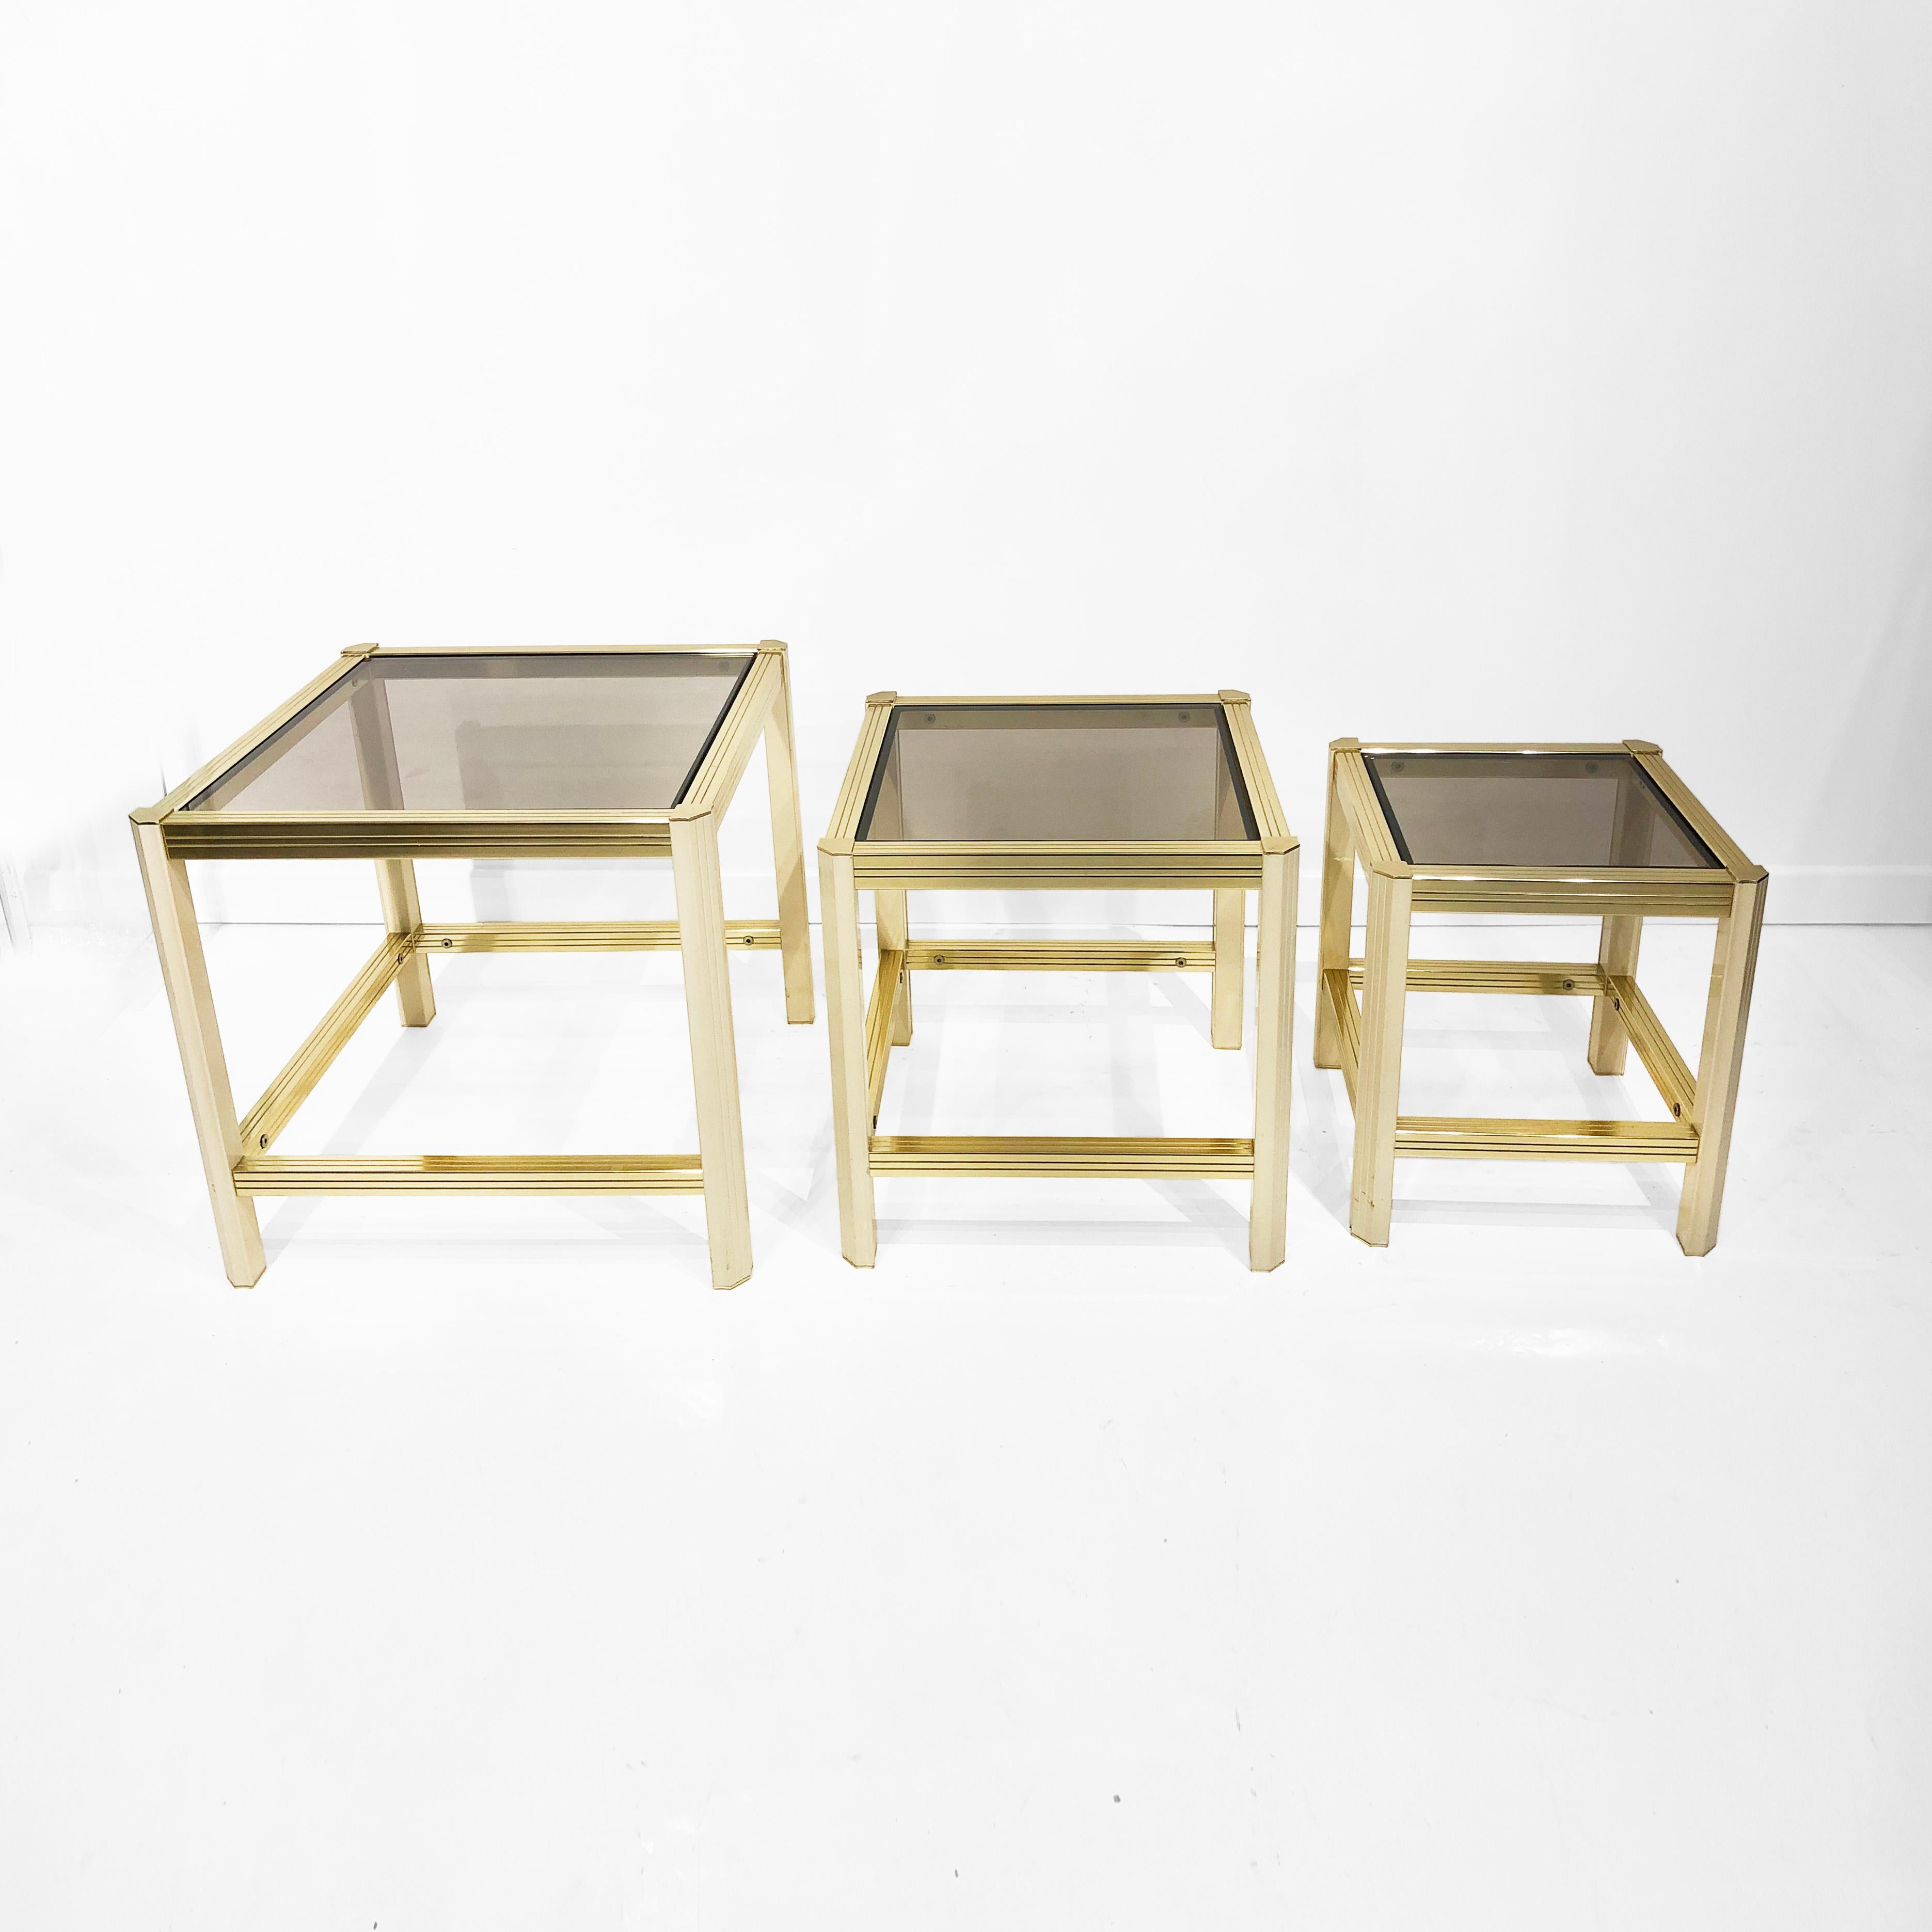 French Brass Beige Nesting Tables 1970s Hollywood Regency Smoked Glass Side Sofa 3